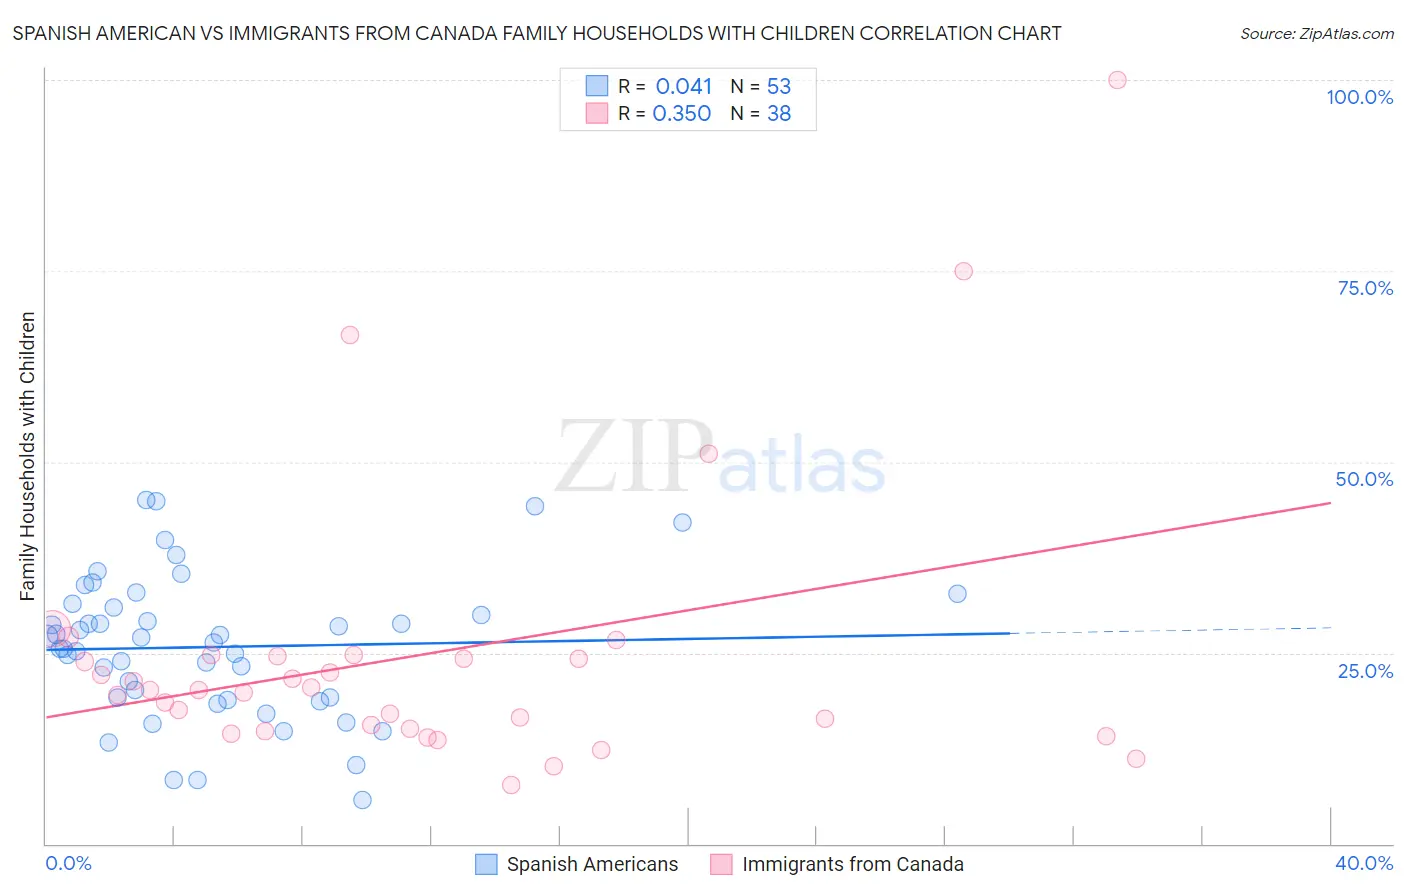 Spanish American vs Immigrants from Canada Family Households with Children